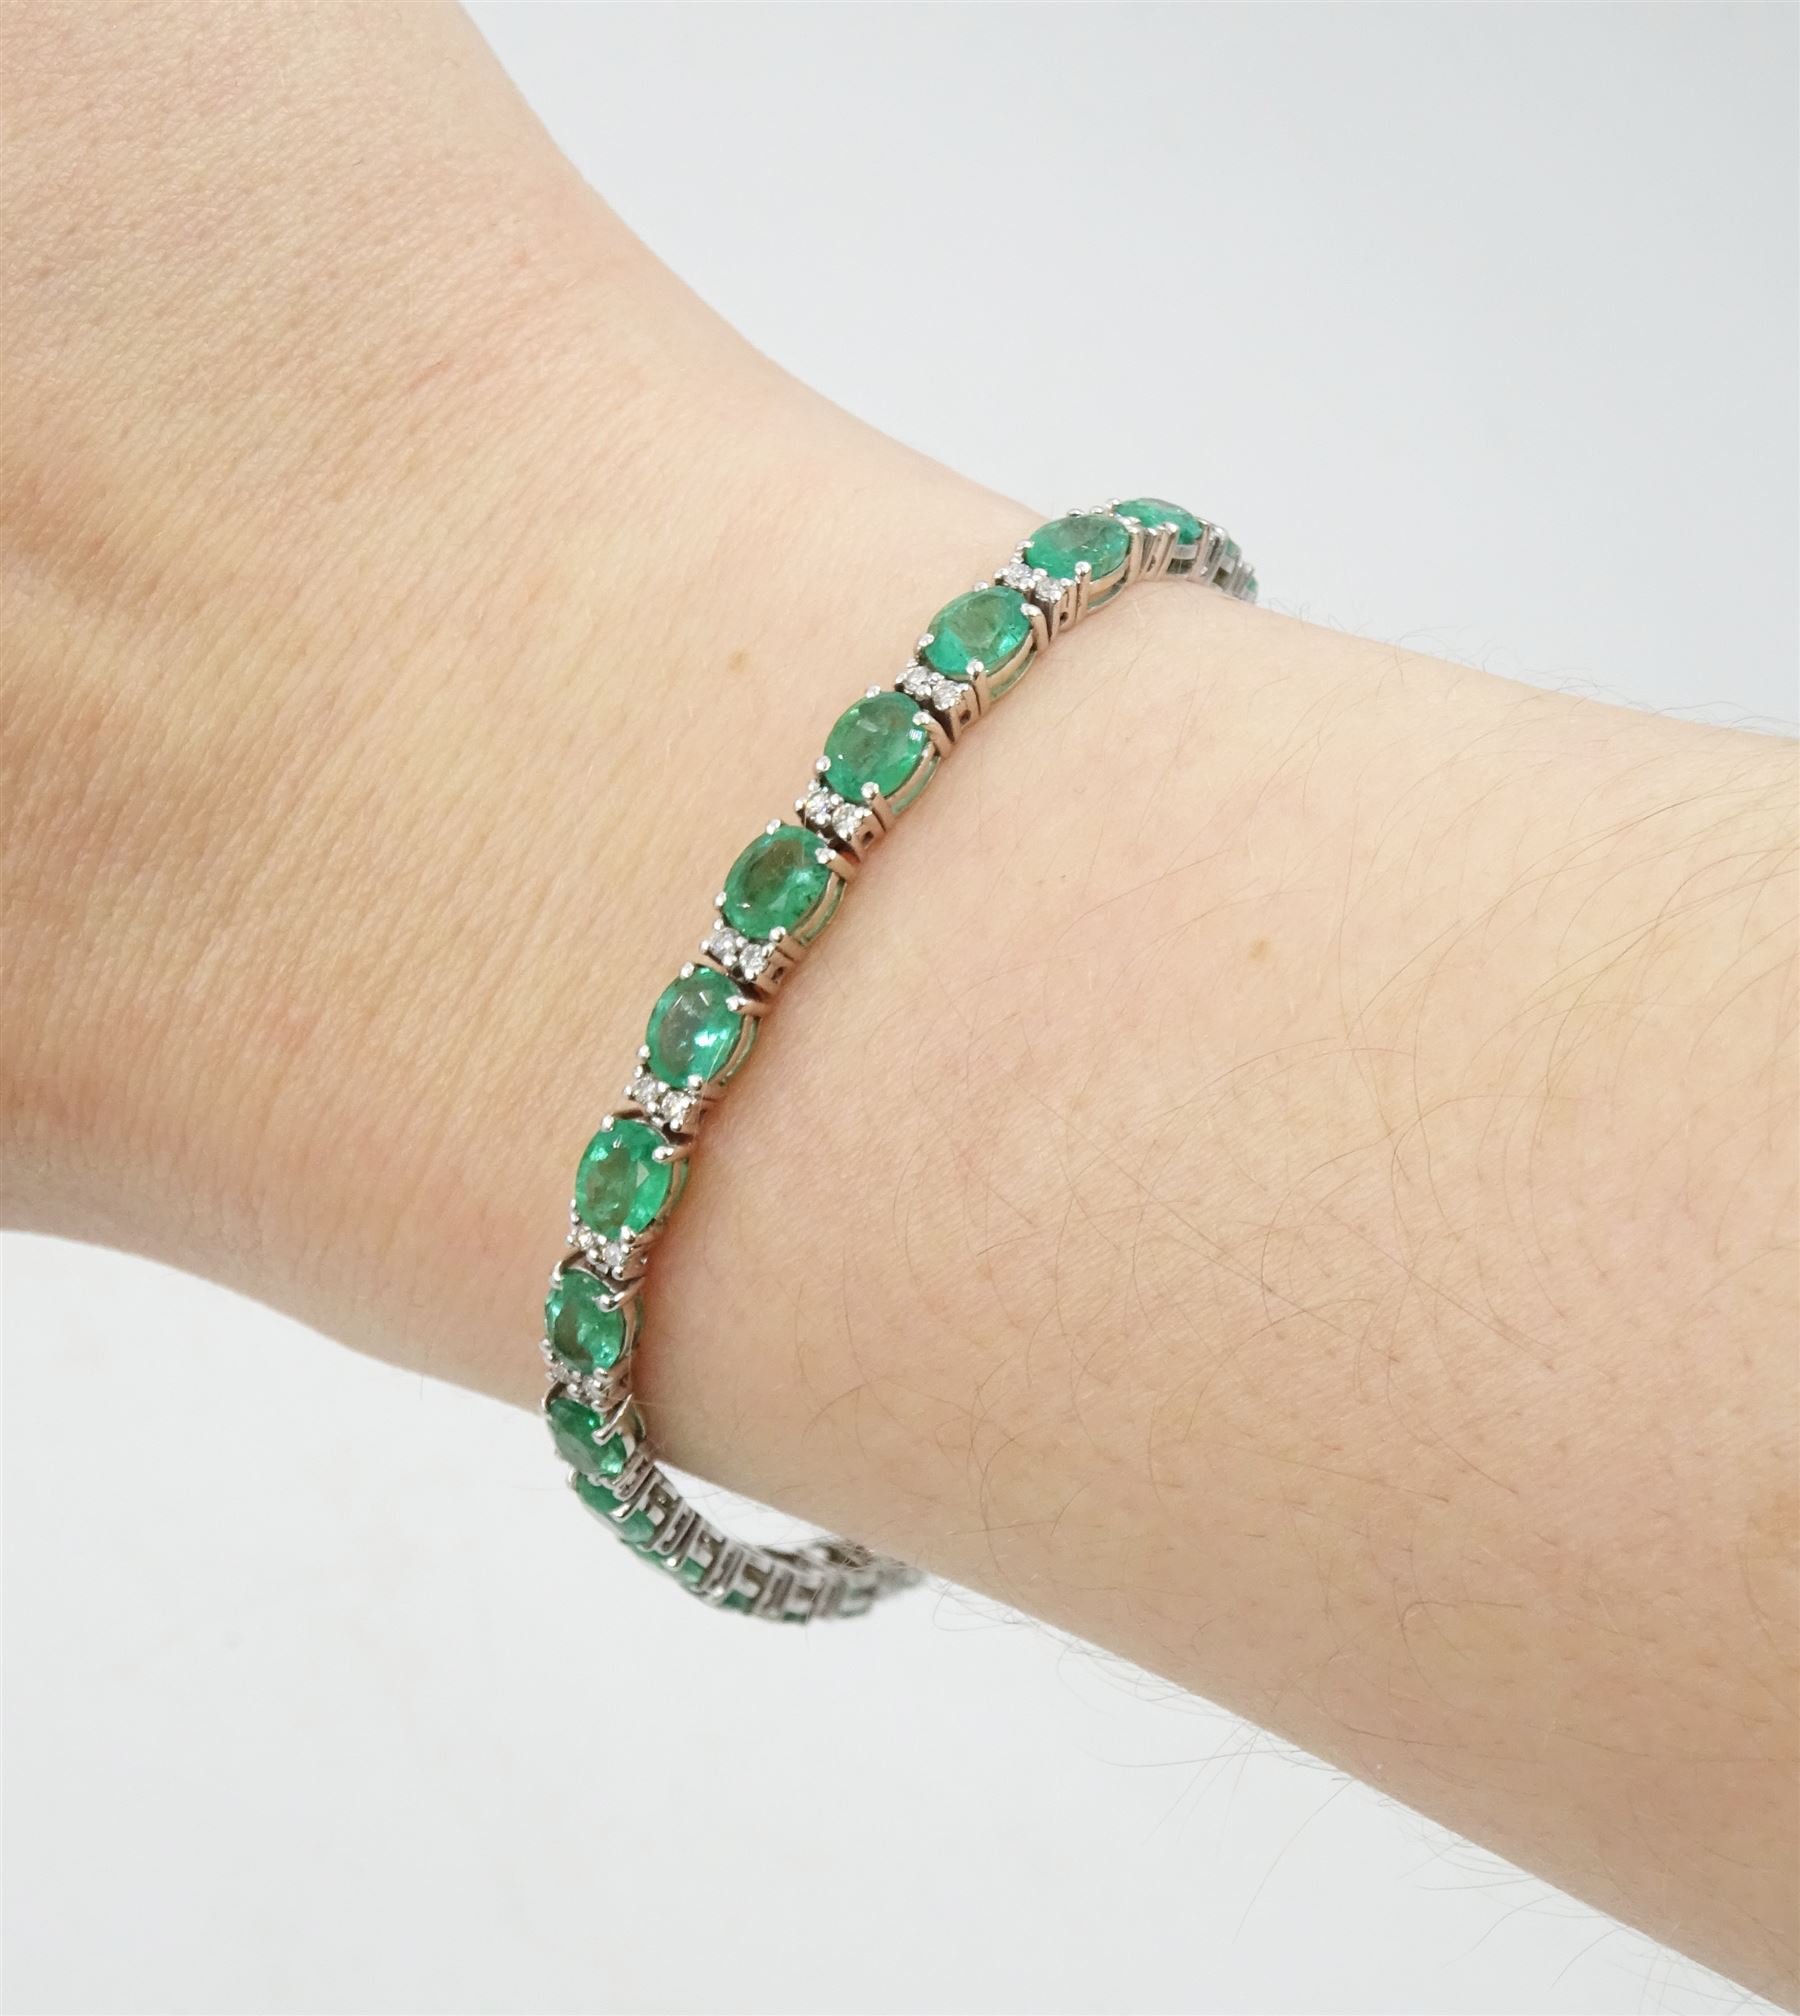 18ct white gold oval emerald and round brilliant cut diamond bracelet - Image 3 of 4